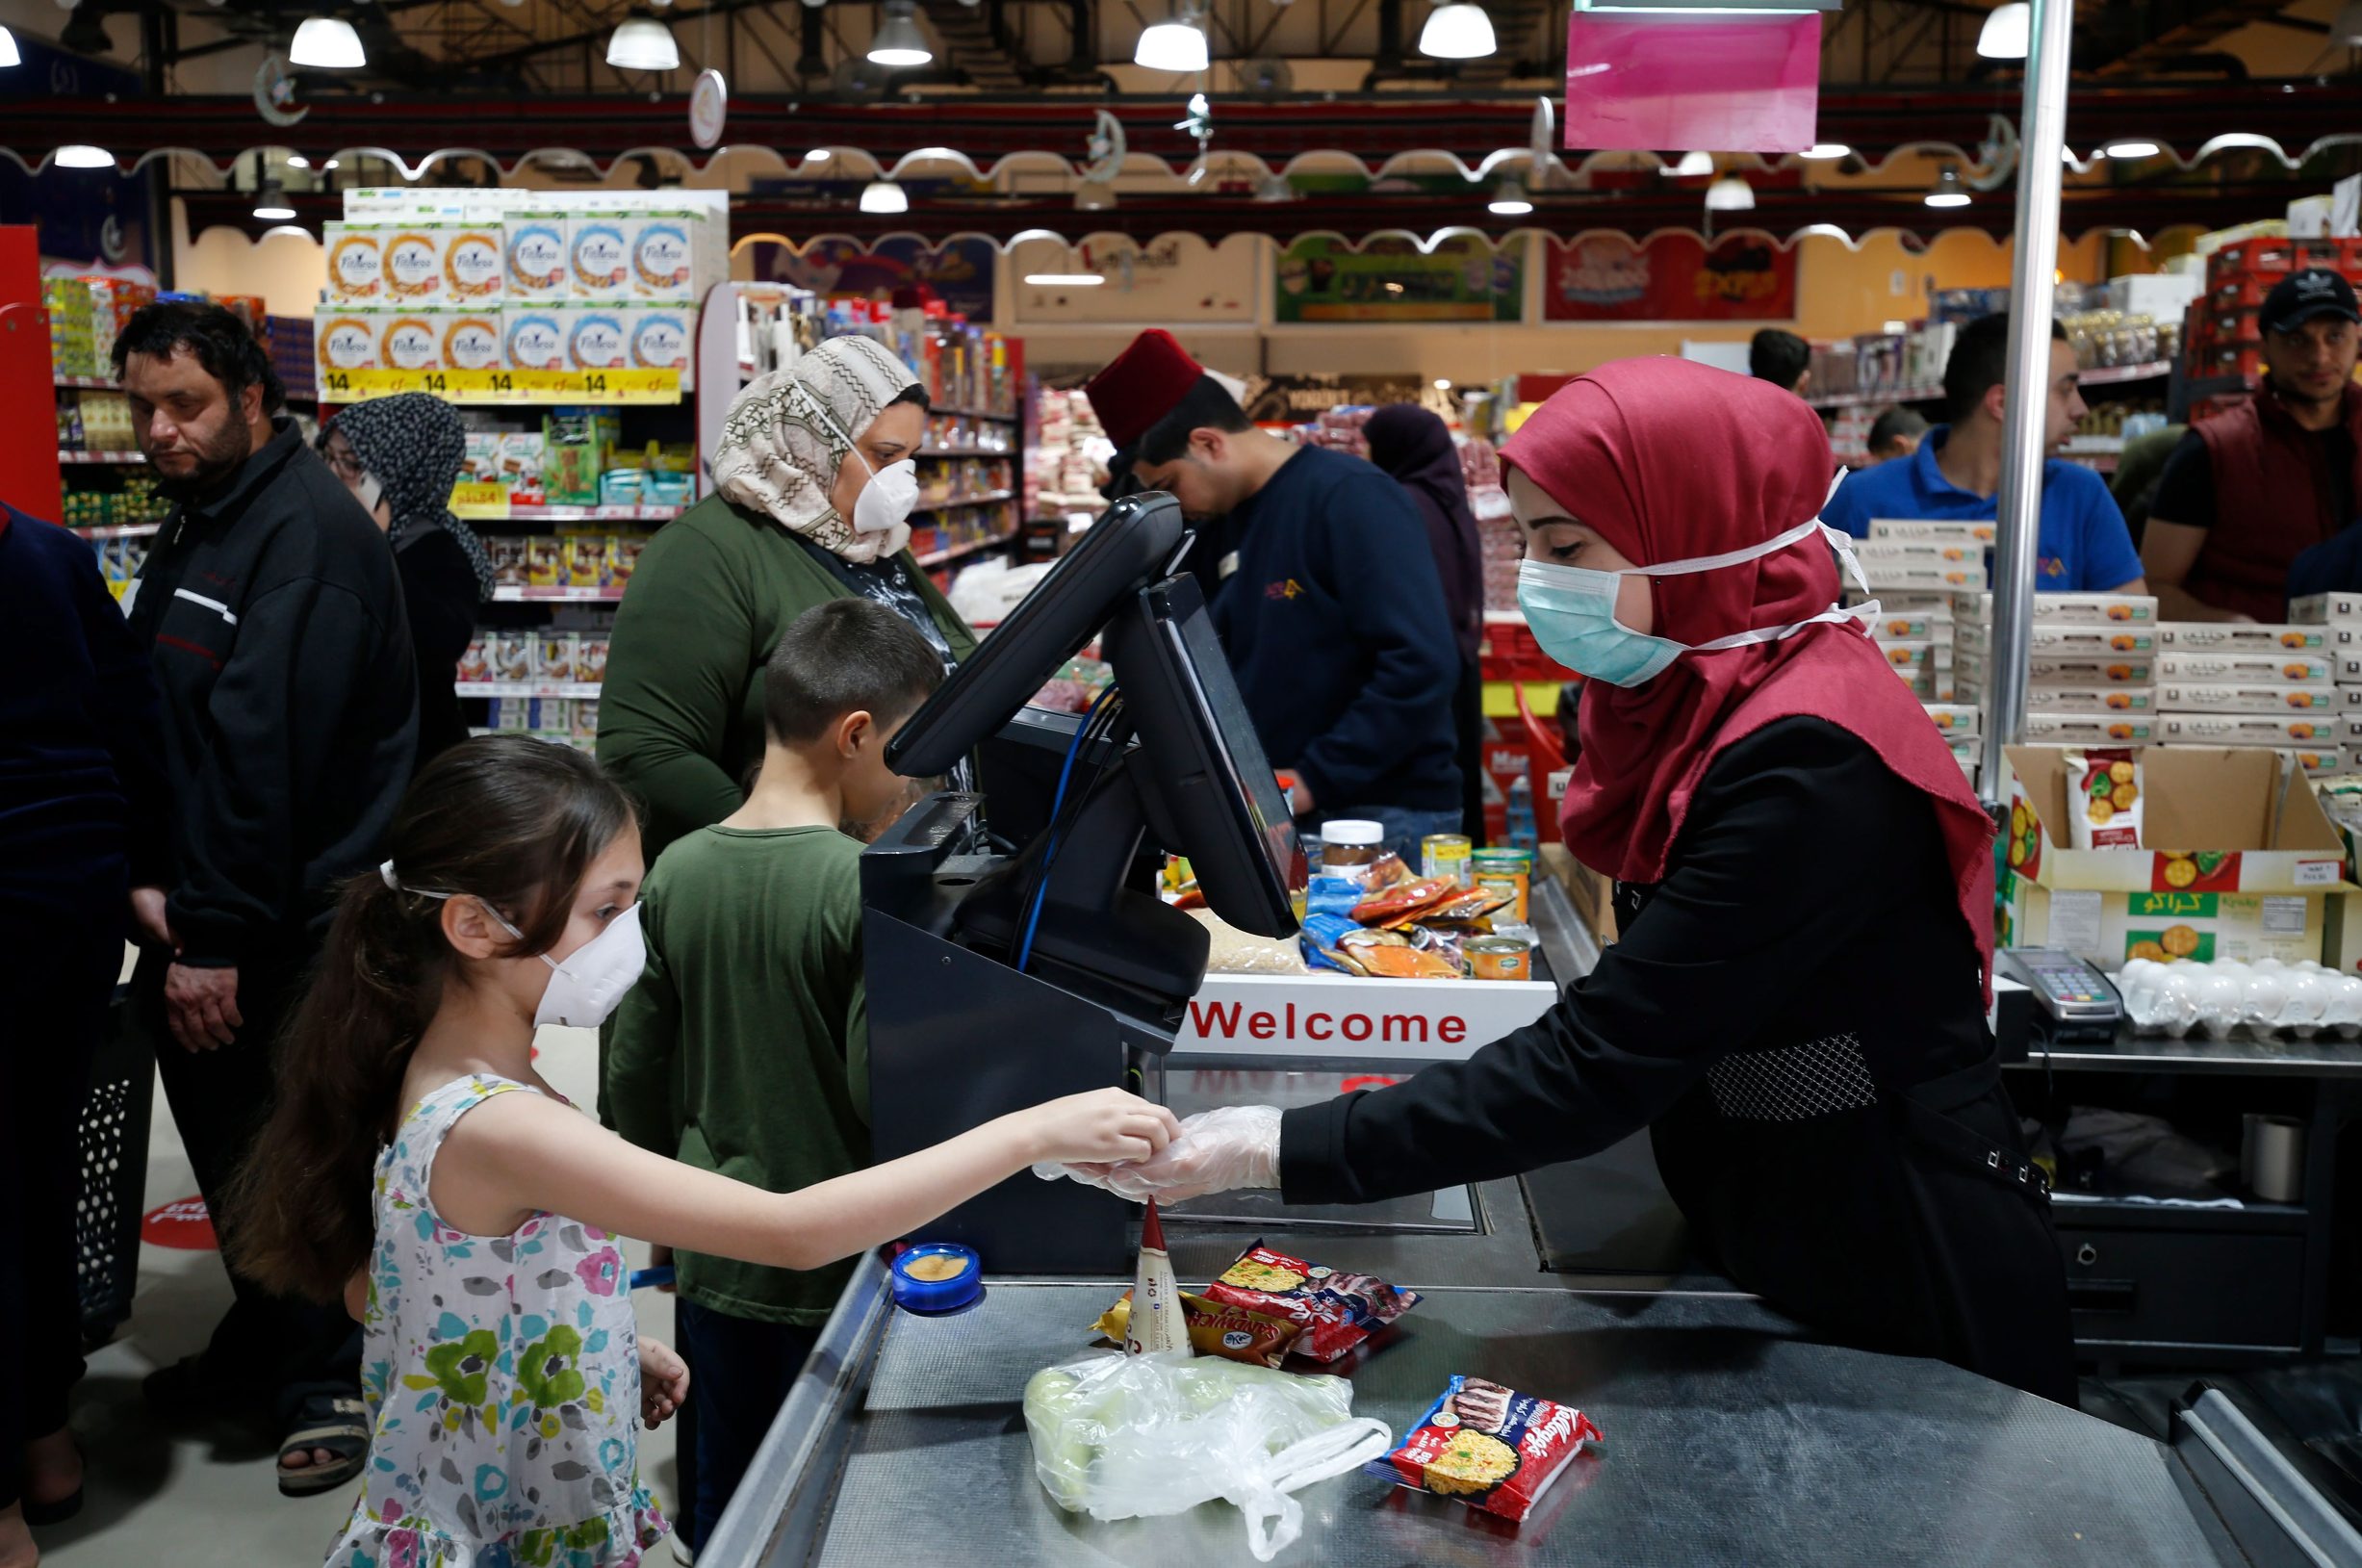 A Palestinians girl wearing a face mask buys food items at a supermarket in Gaza City ahead of the Muslim holy month of Ramadan, on April 23, 2020, during the novel coronavirus pandemic crisis. (Photo by MOHAMMED ABED / AFP)